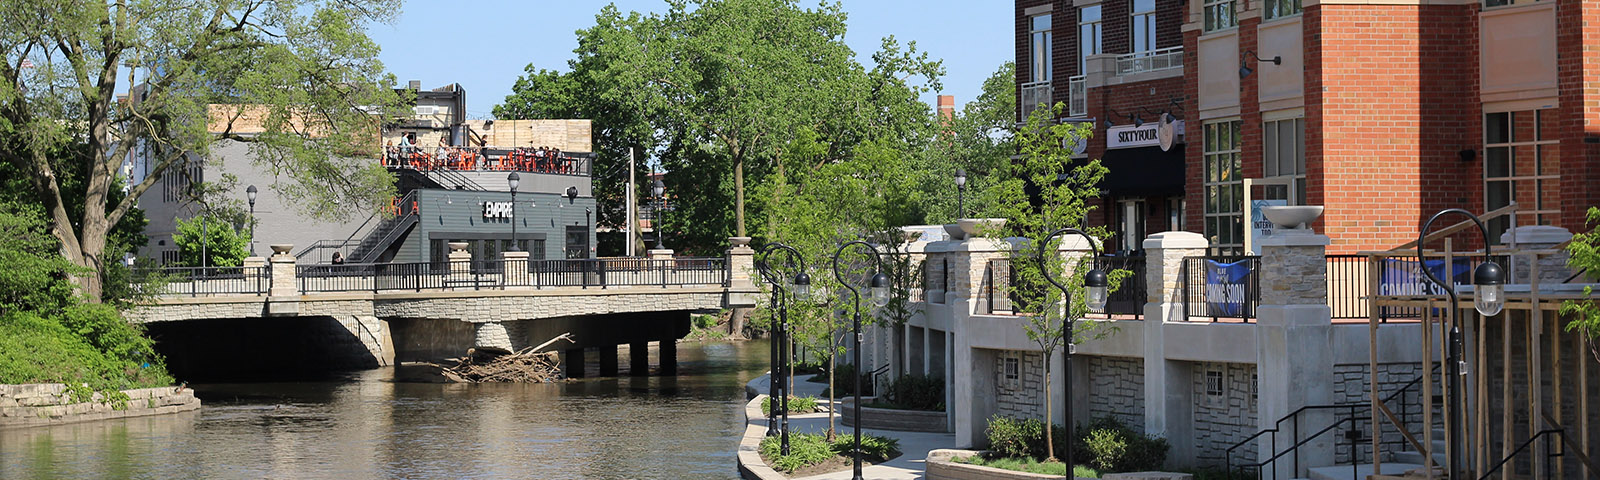 Naperville Water District with a canal